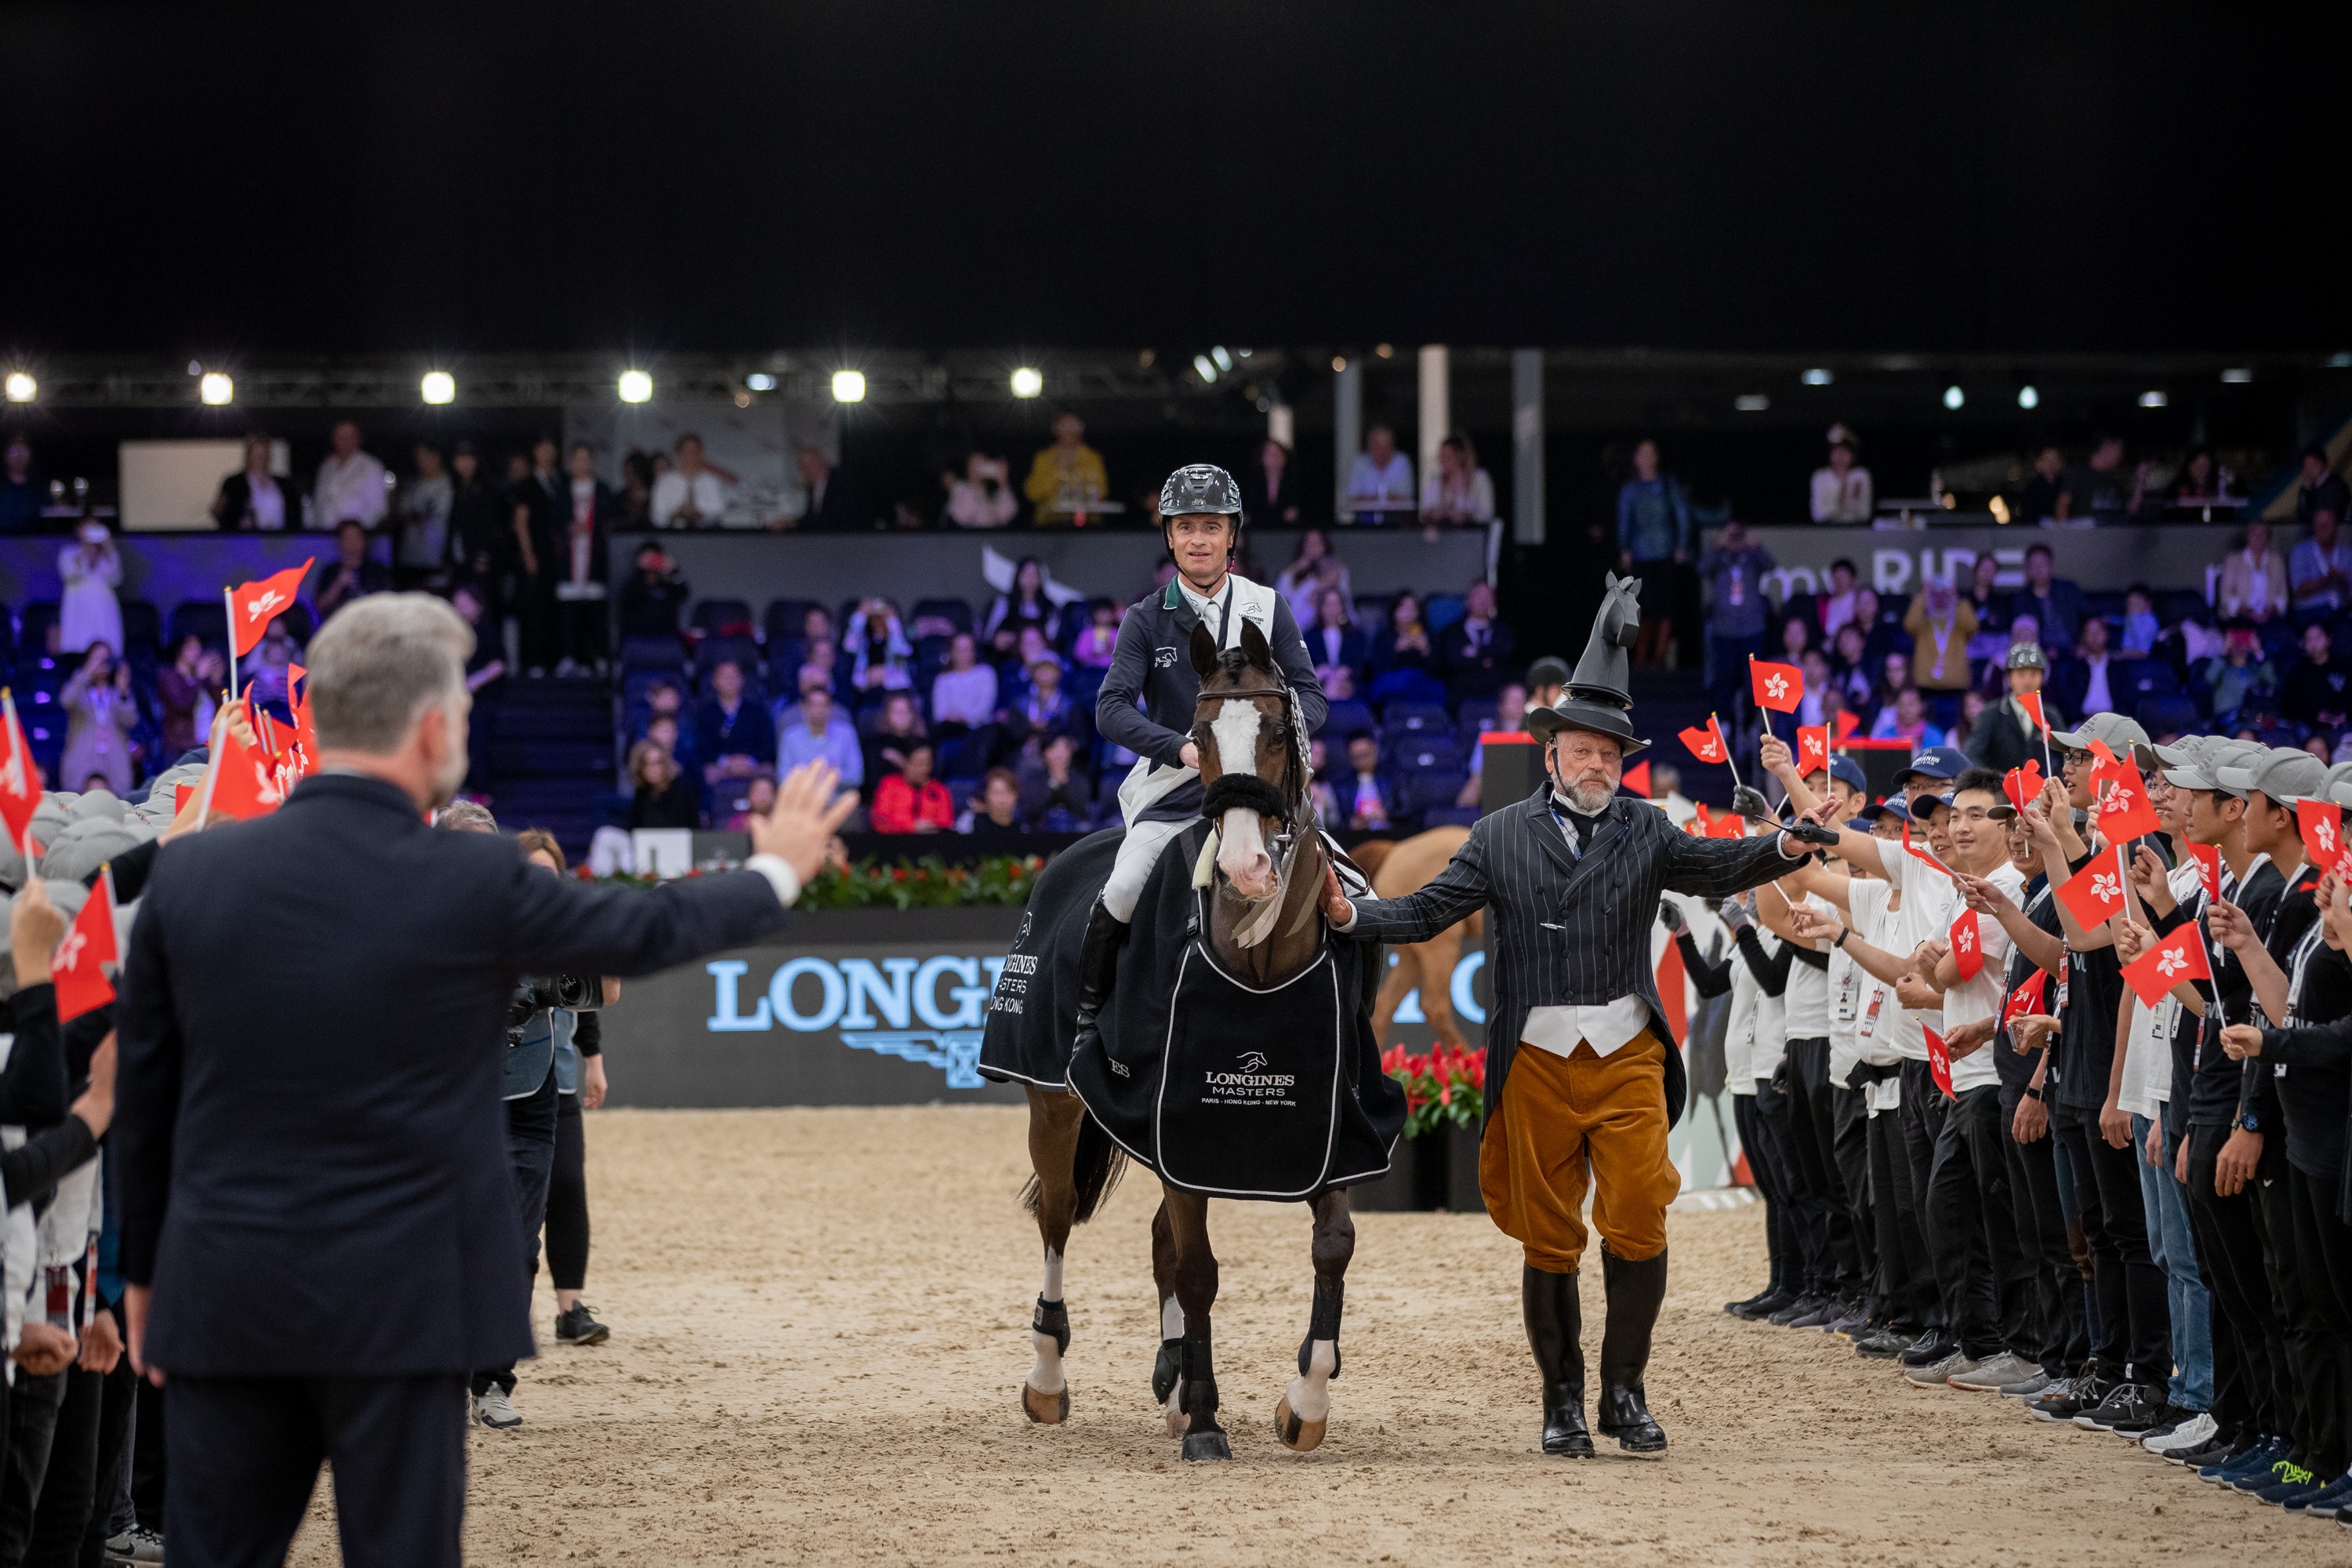 Denis Lynch celebrates his victory with fans at the Longines Grand Prix of Hong Kong. Photo: Jessica Rodrigues